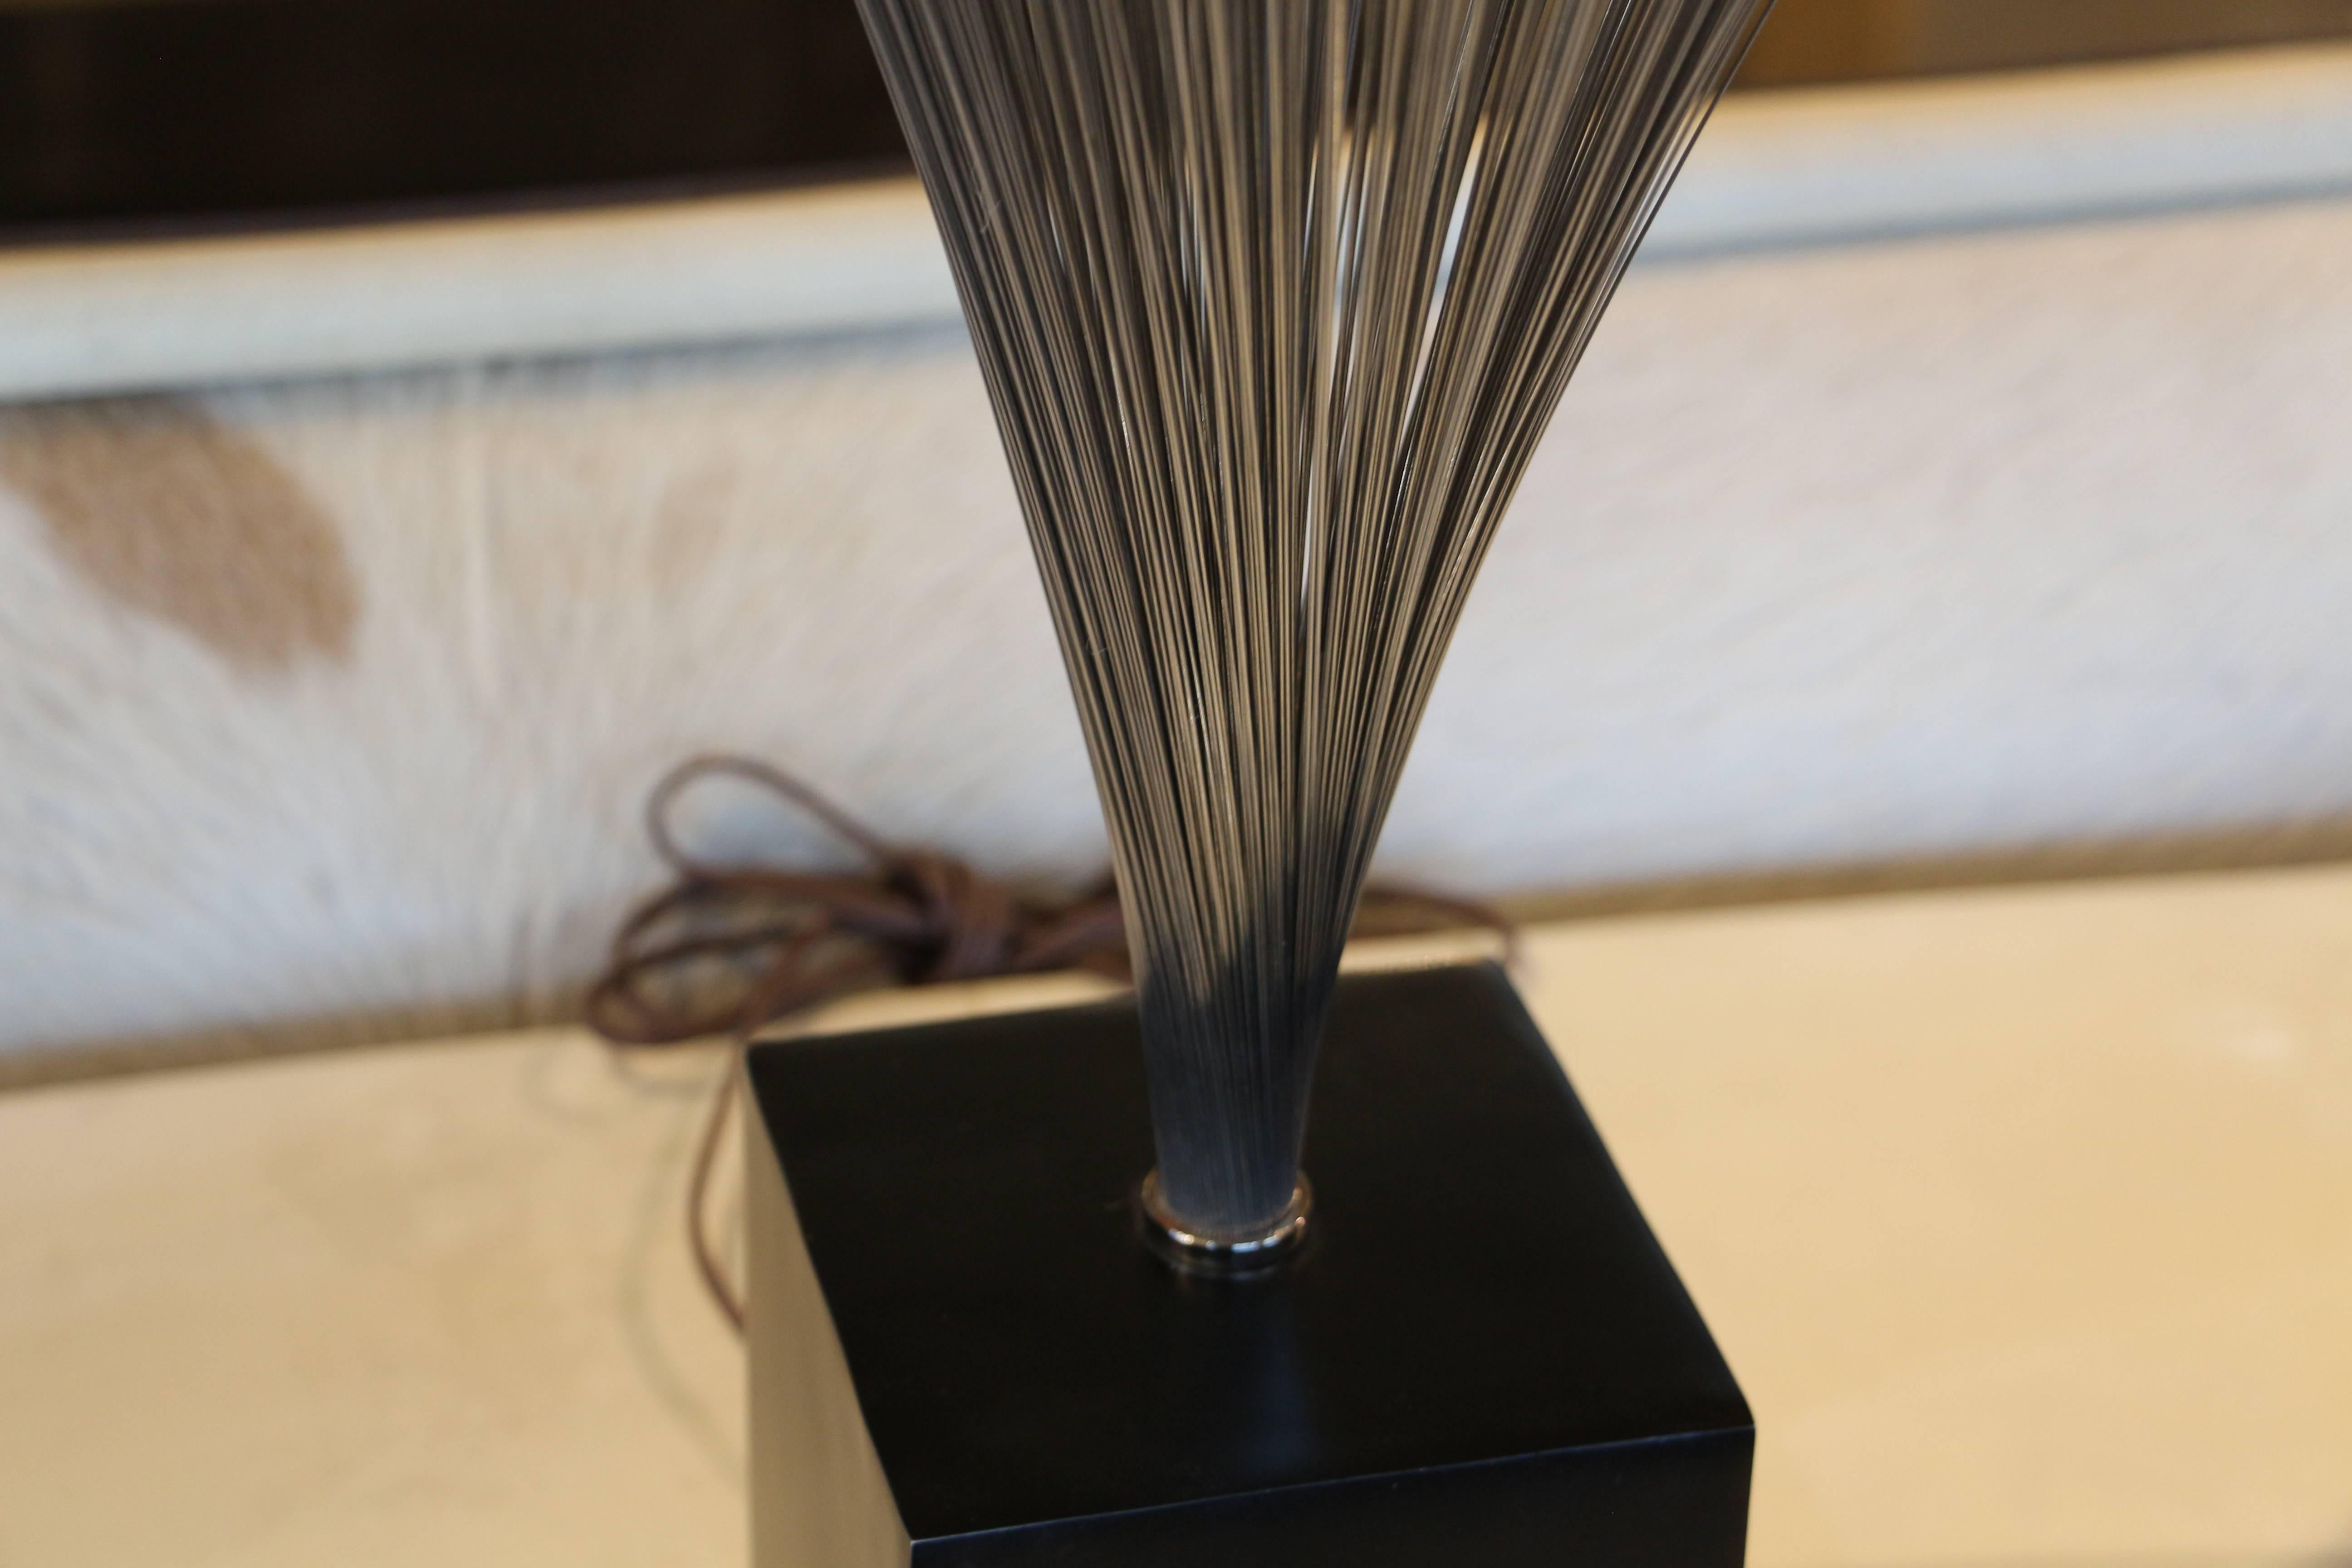 A nice vintage Laurel spray lamp in working condition. It looks like a lighted Harry Bertoia spray sculpture with a lamp in it. Nice overall condition, with minor marks and flaws.